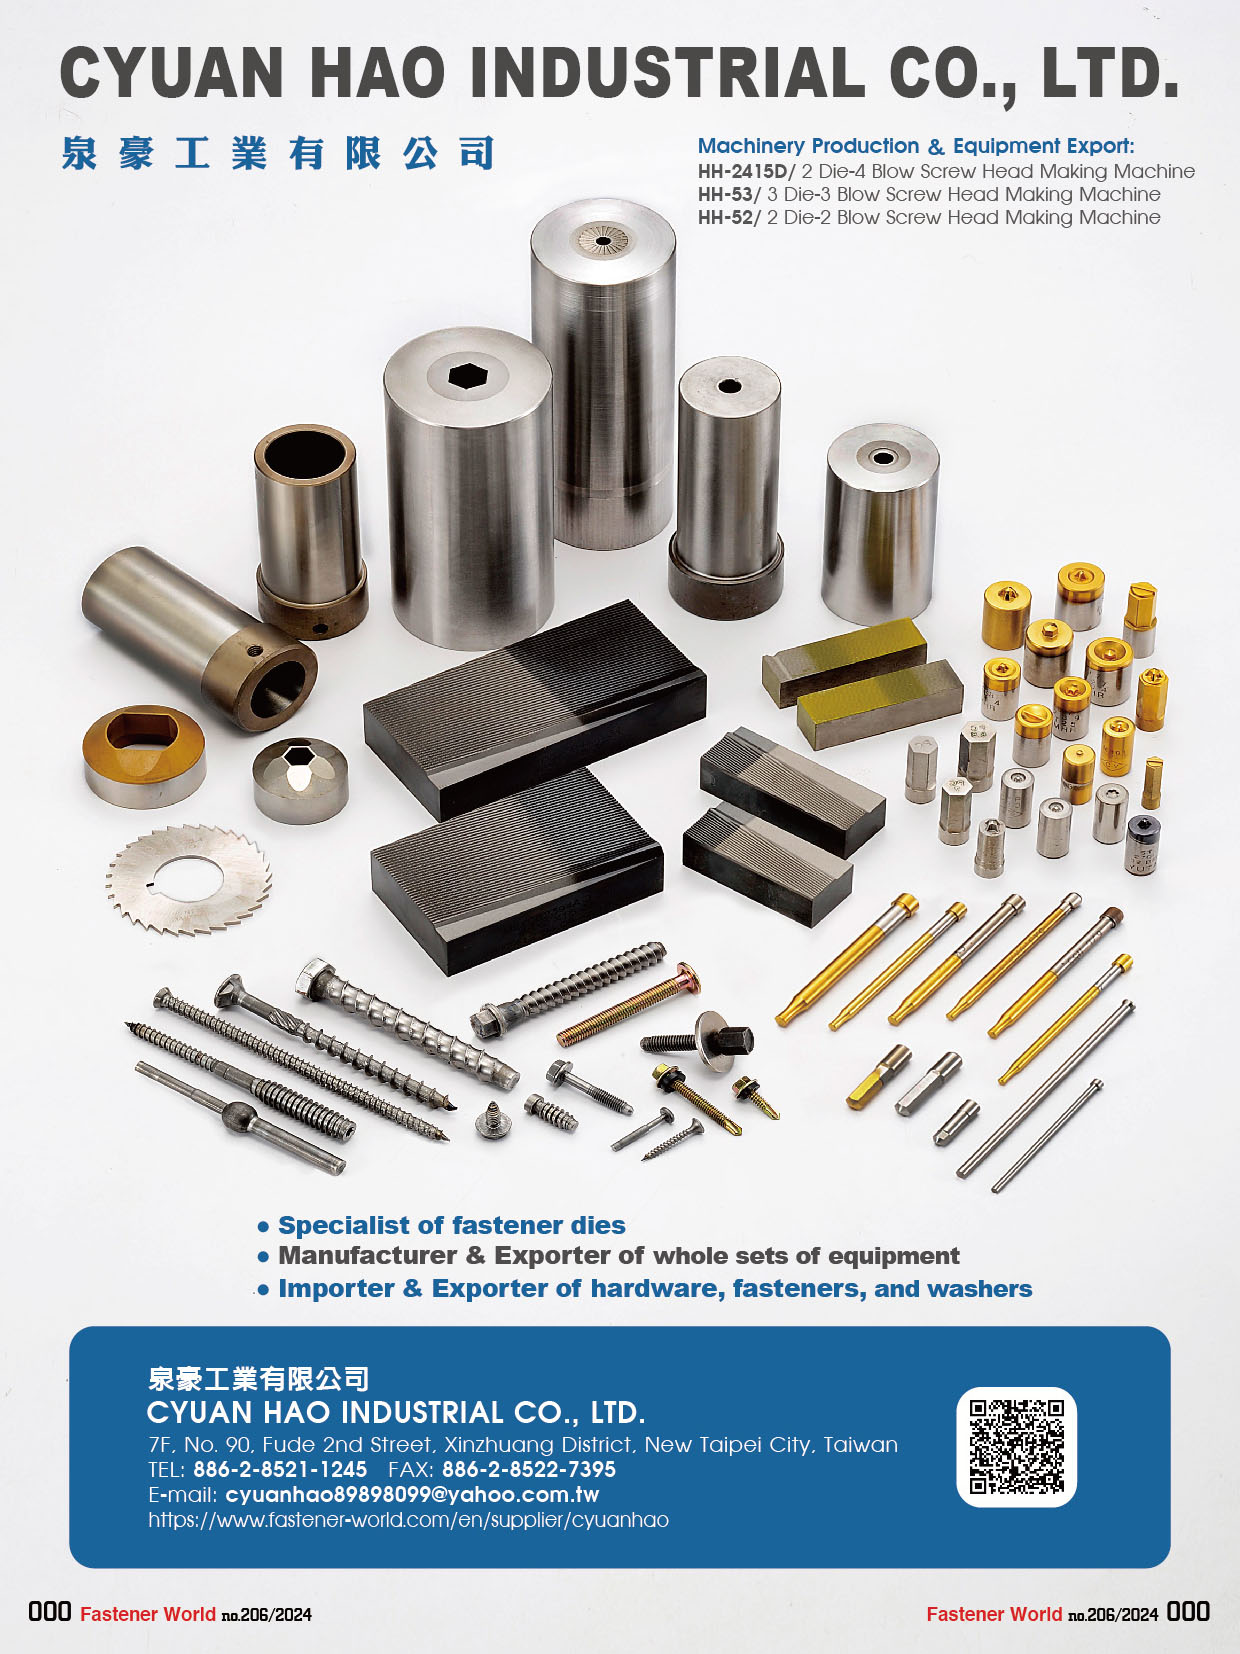 CYUAN HAO INDUSTRIAL CO., LTD. , Specialist of Fastener Dies Importer & Exporter of Hardware Fastener and Washers